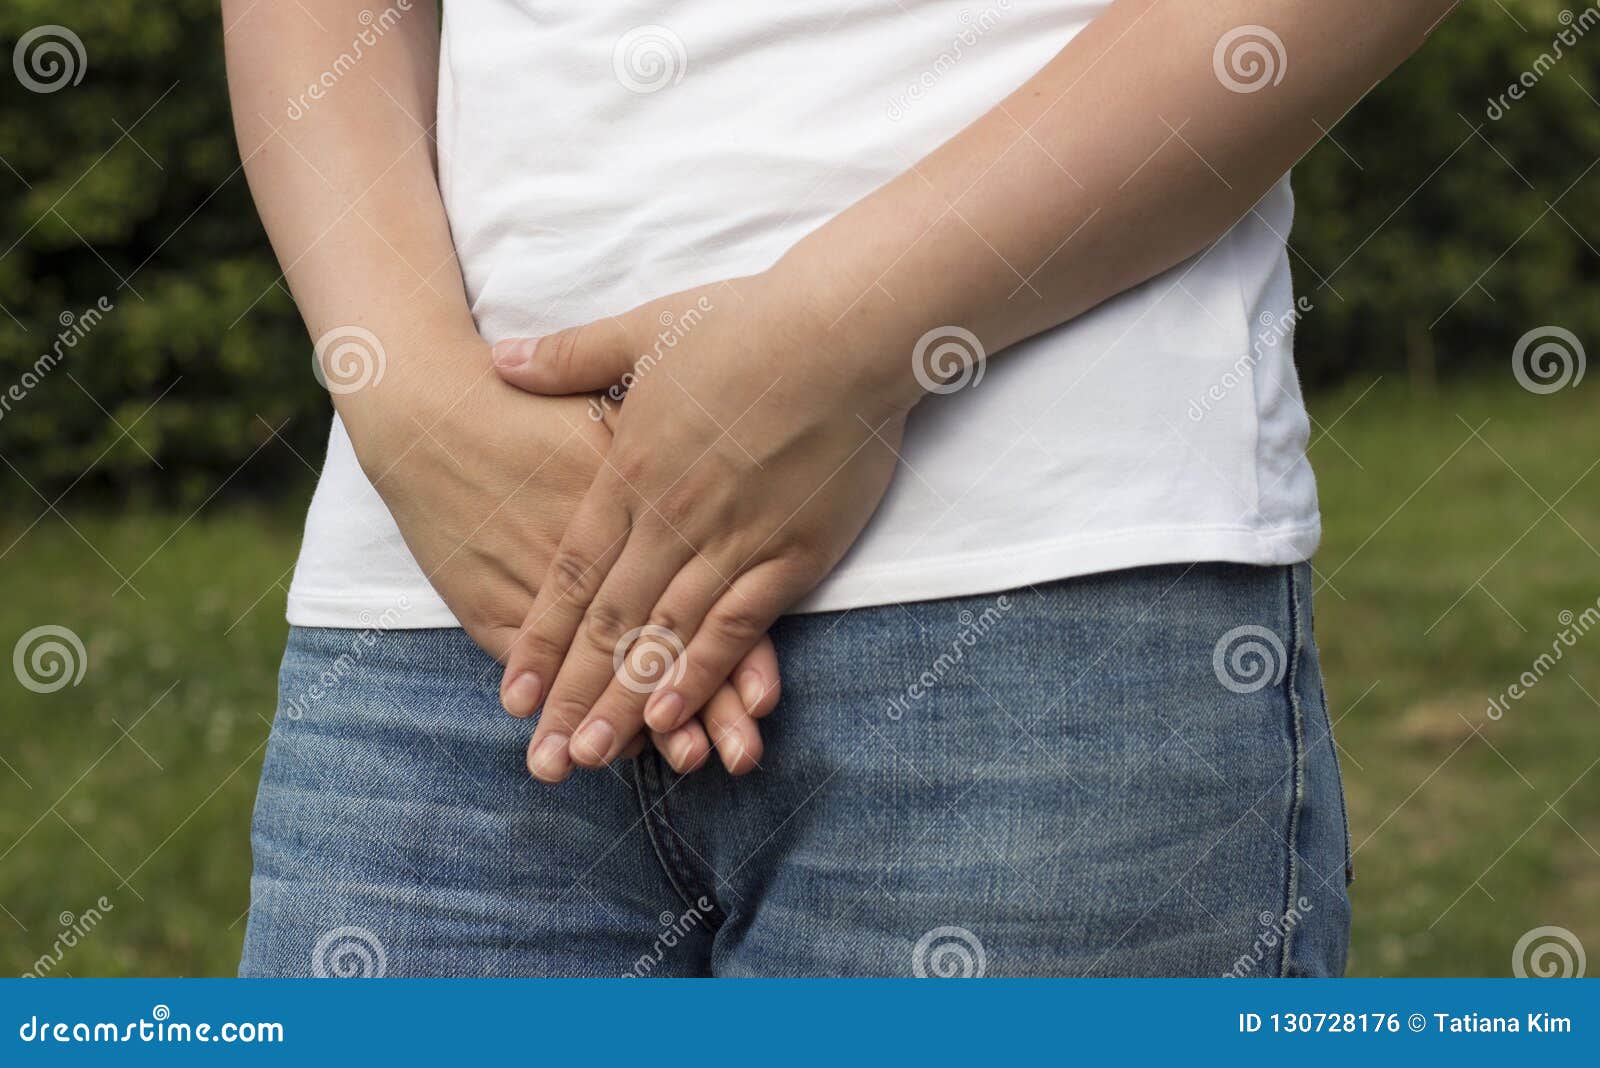 Woman with Hands Holding Her Crotch Stock Image - Image of lady, disease:  82740821